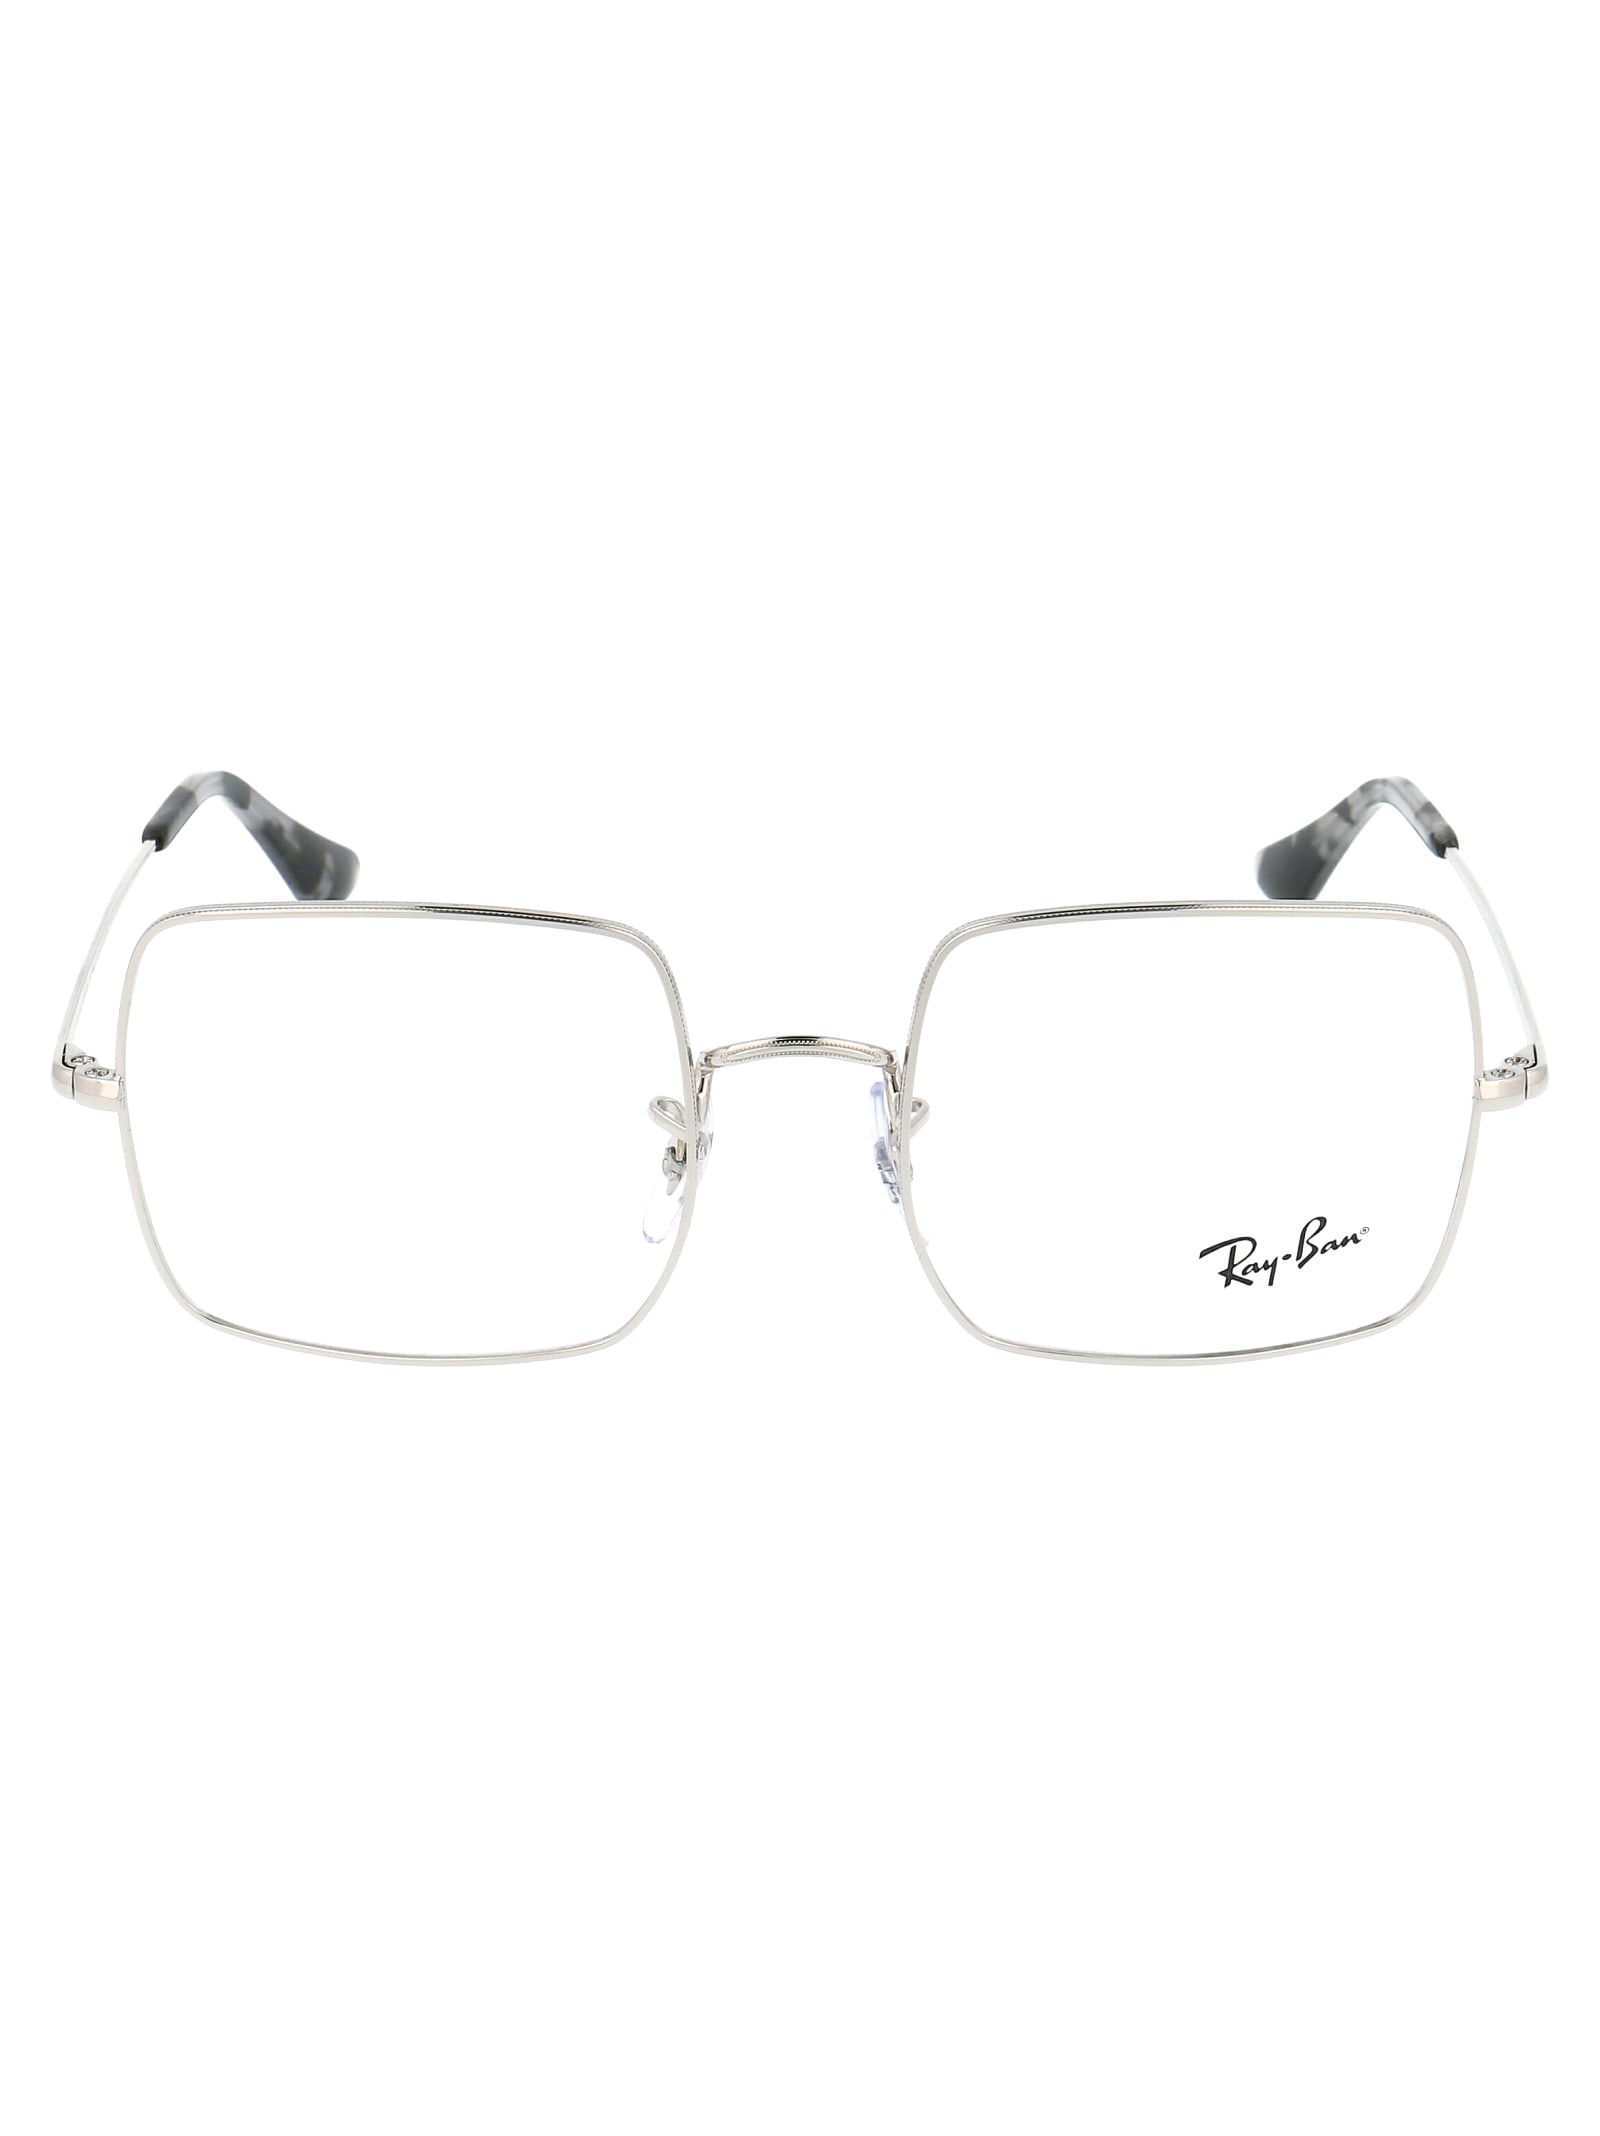 Ray Ban Square Glasses In 2501 Silver